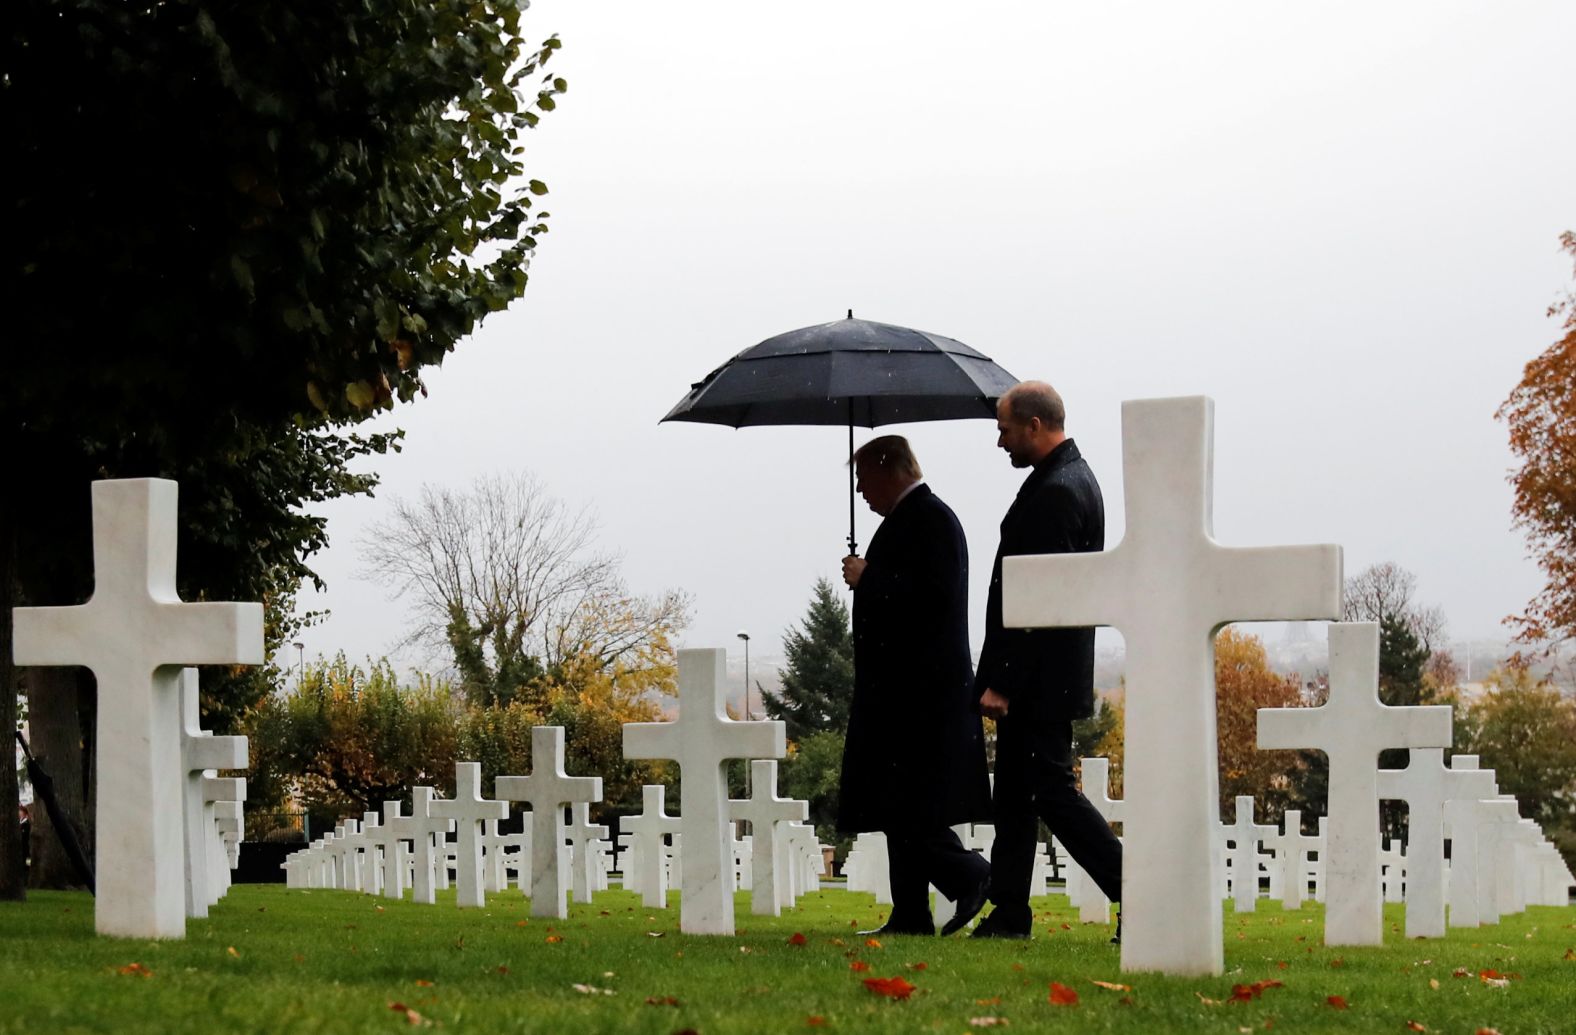 US President Donald Trump takes part in the commemoration ceremony for Armistice Day at the Suresnes American Cemetery and Memorial in Paris on Sunday.